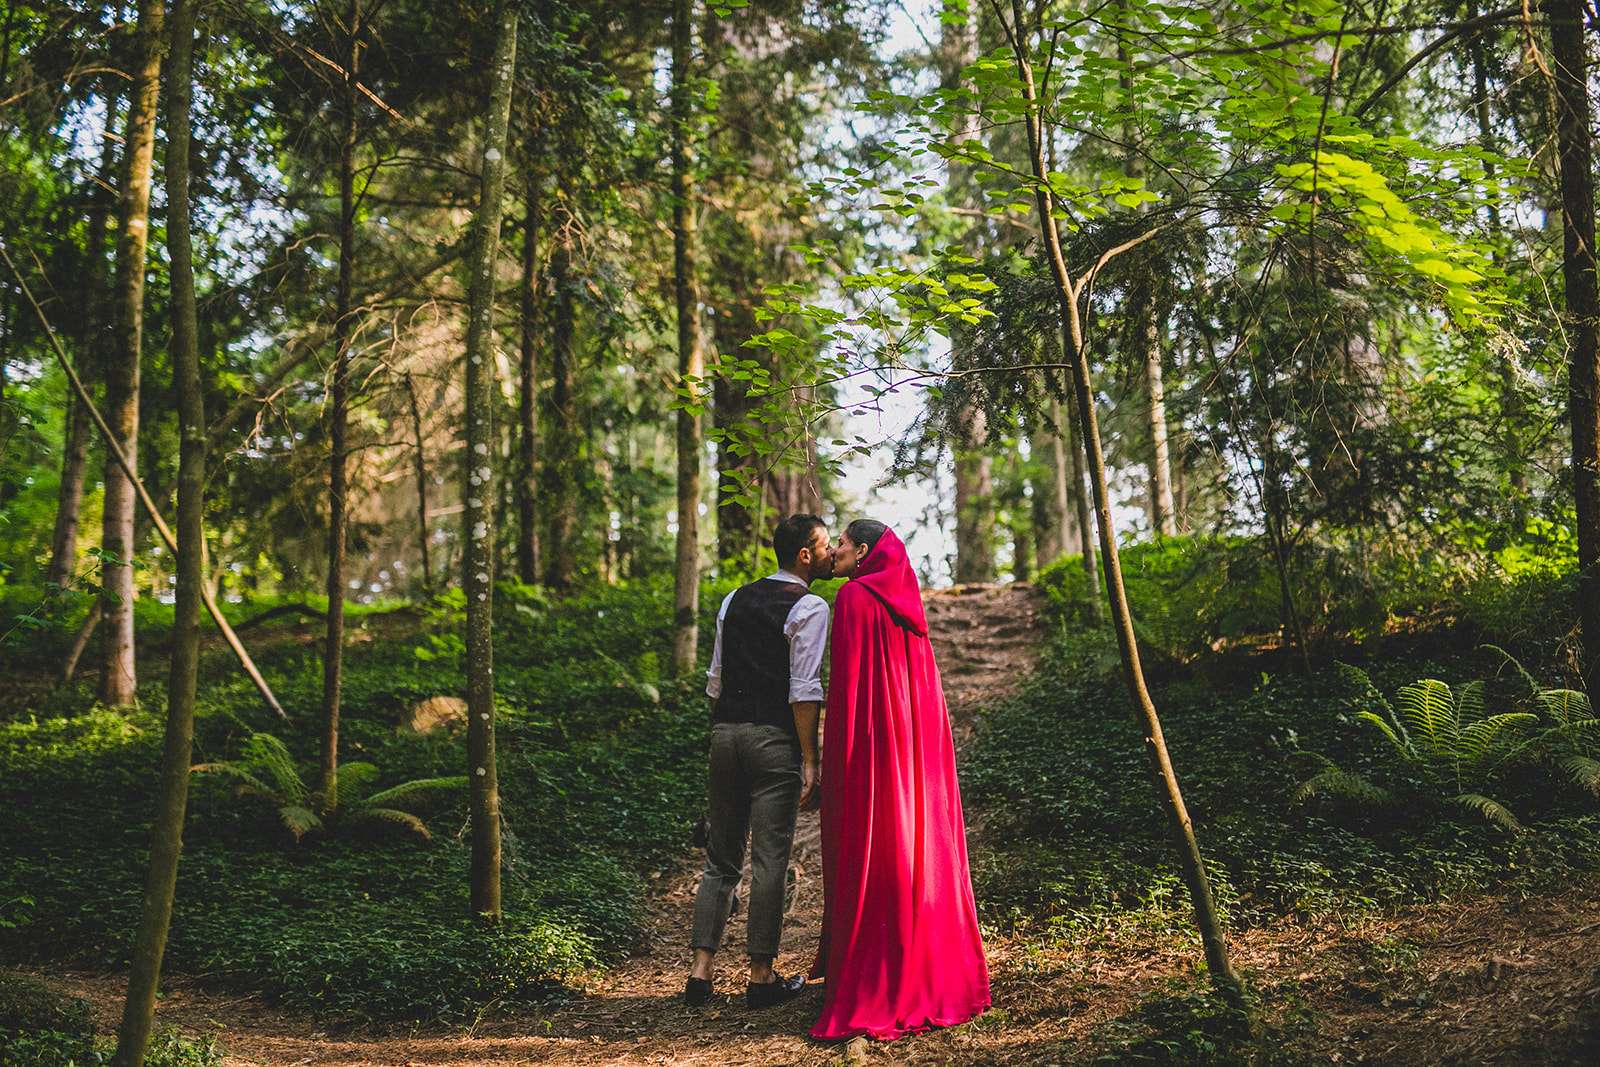 Woodland Party Wedding with A Basketball Tournament, A Pop Up Tattoo Studio  & the Bride in a Fuchsia Cape · Rock n Roll Bride